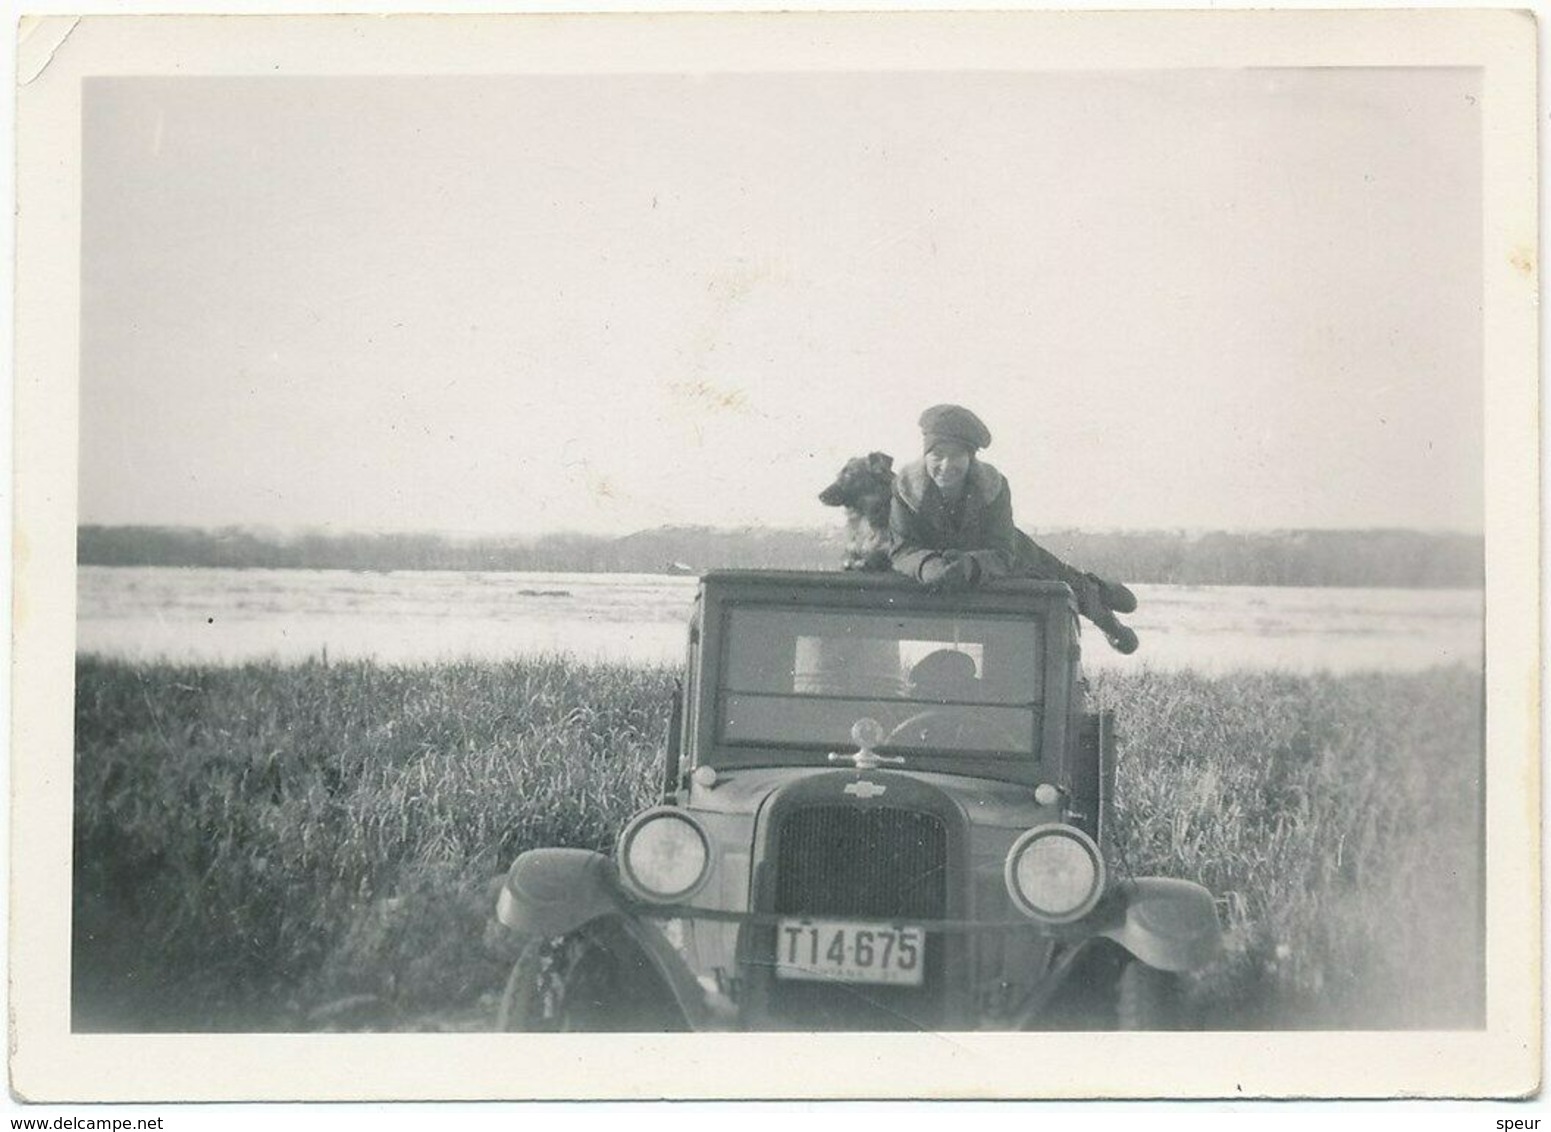 Vintage Snapshot Of Woman With Dog Posing On Top Of Car, ± 1930 - Anonieme Personen